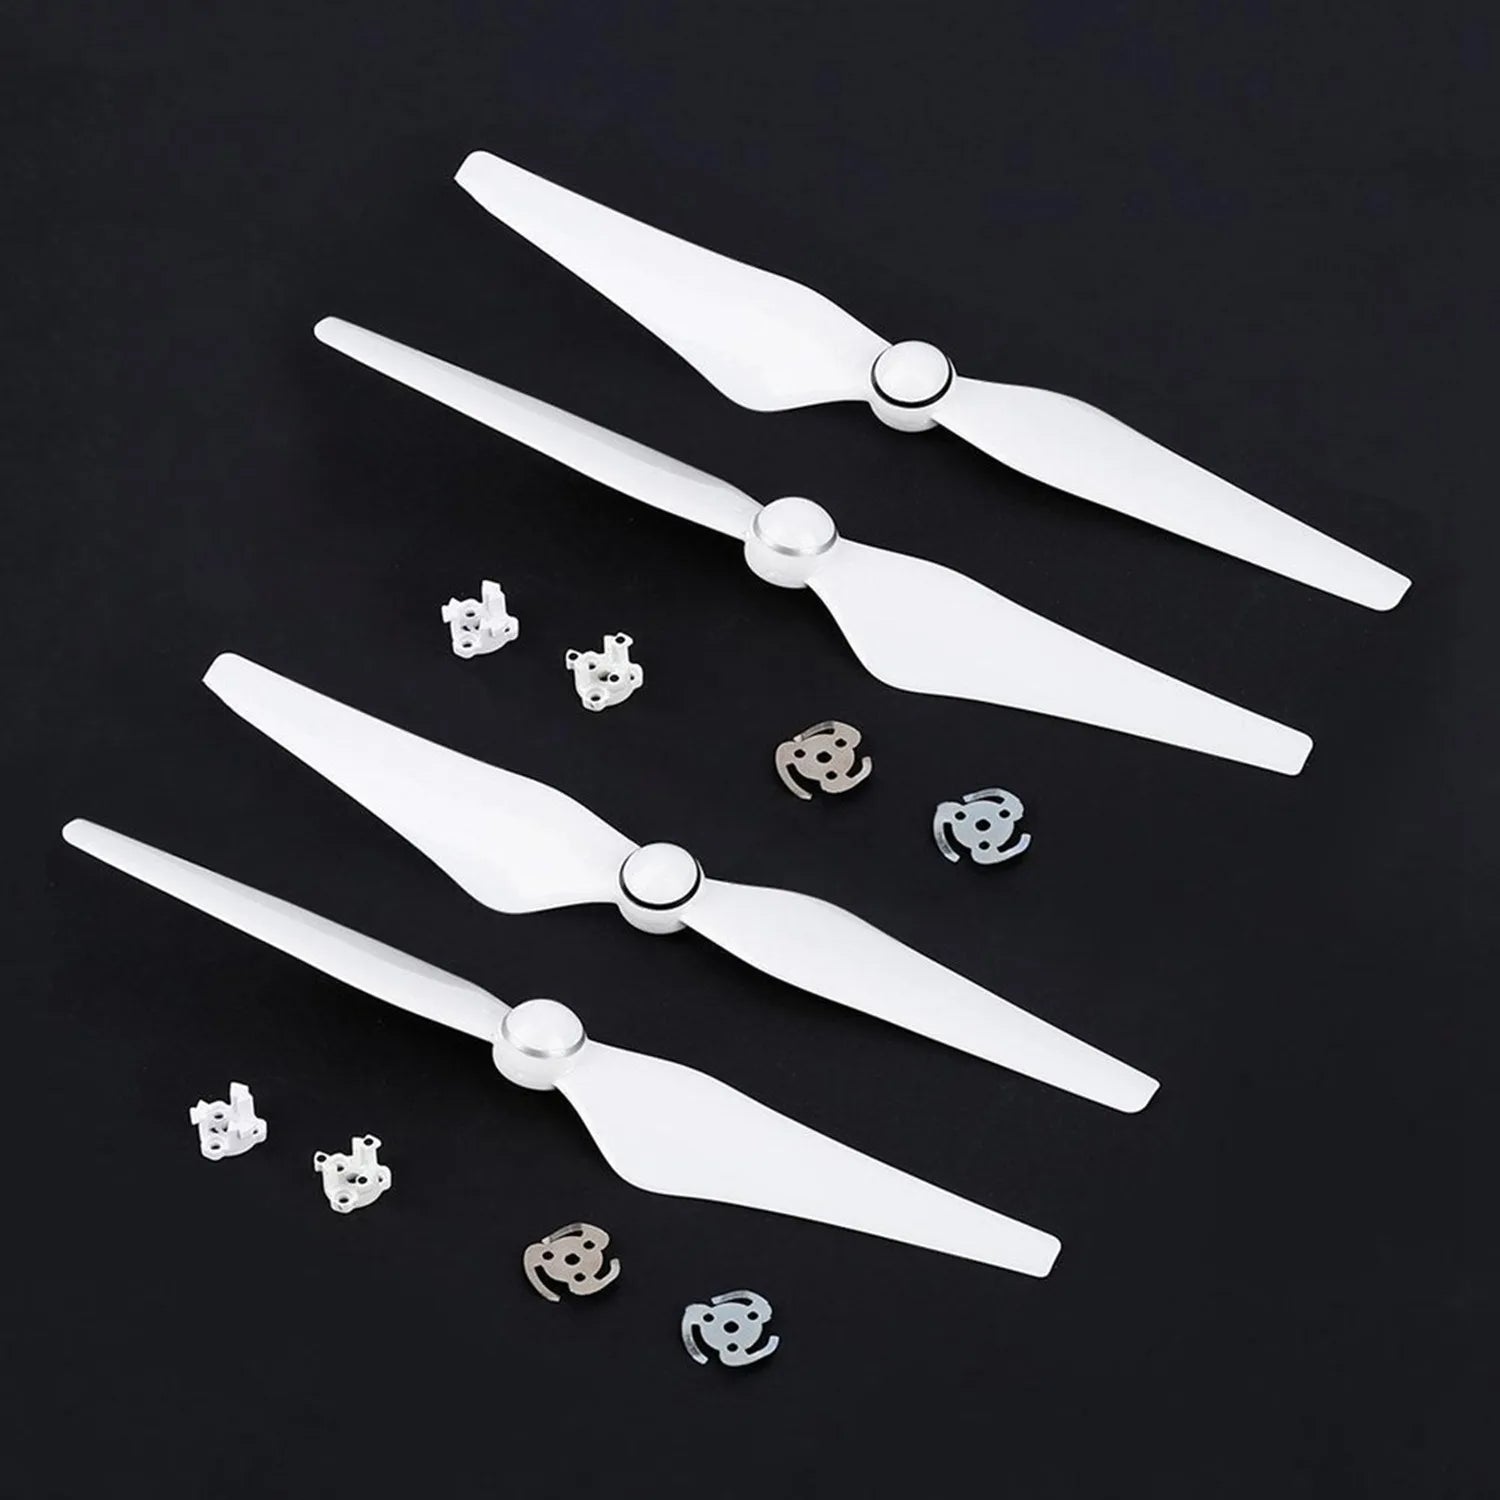 4PCS 9450S Propeller, to avoid bad landing such as scratching a car, cutting a child, dropping like